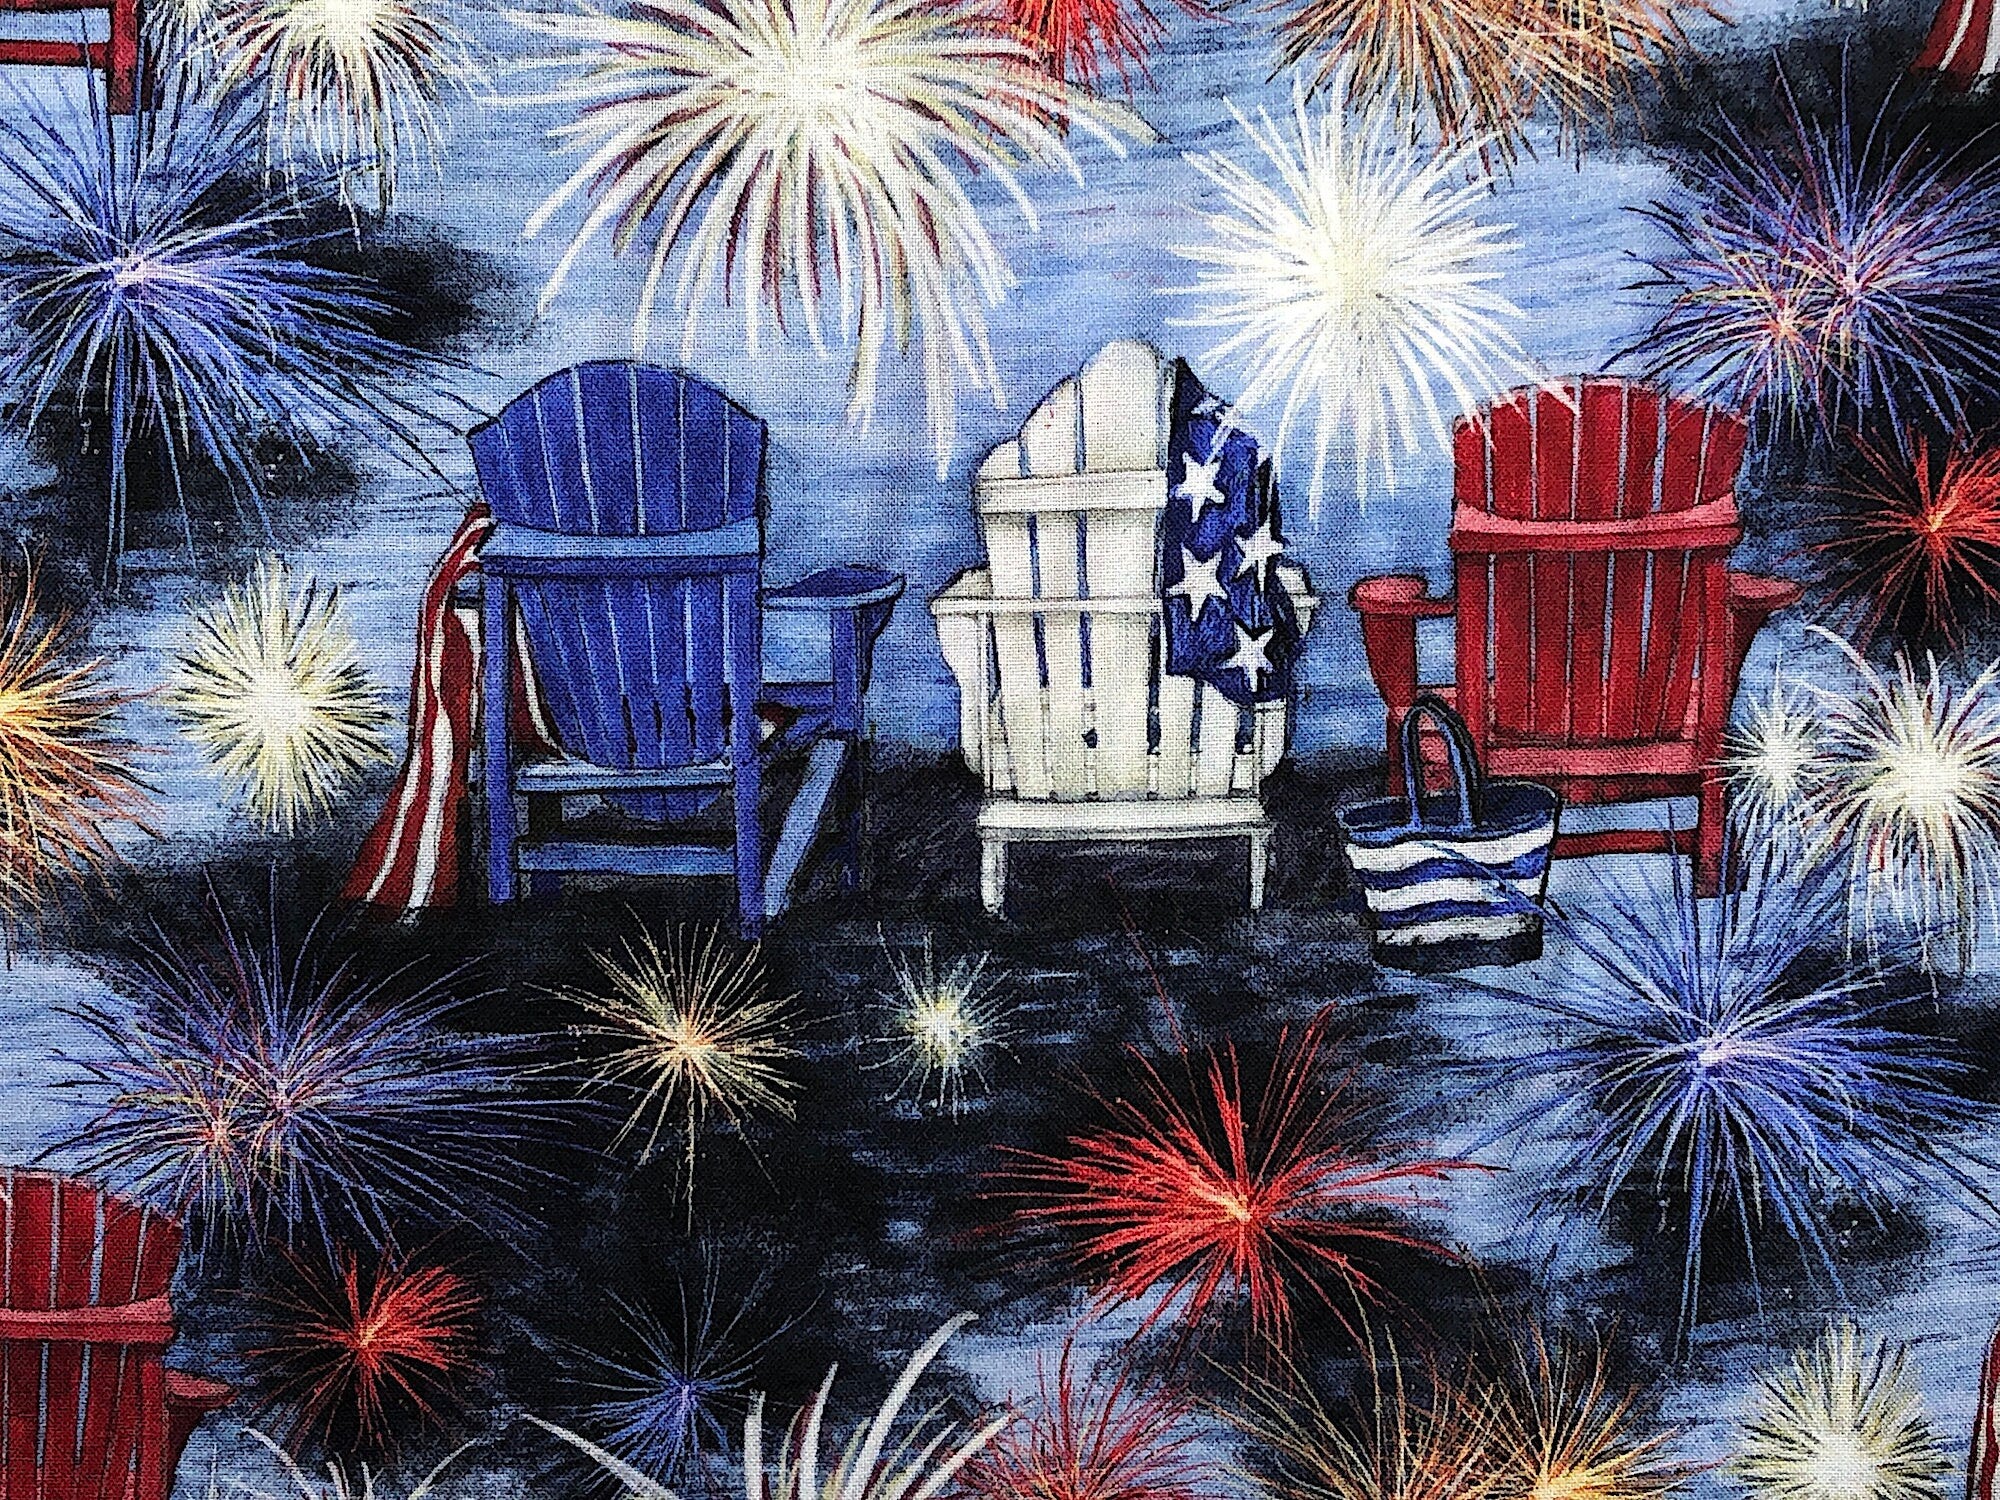 Close up of red, white and blue chairs and fireworks